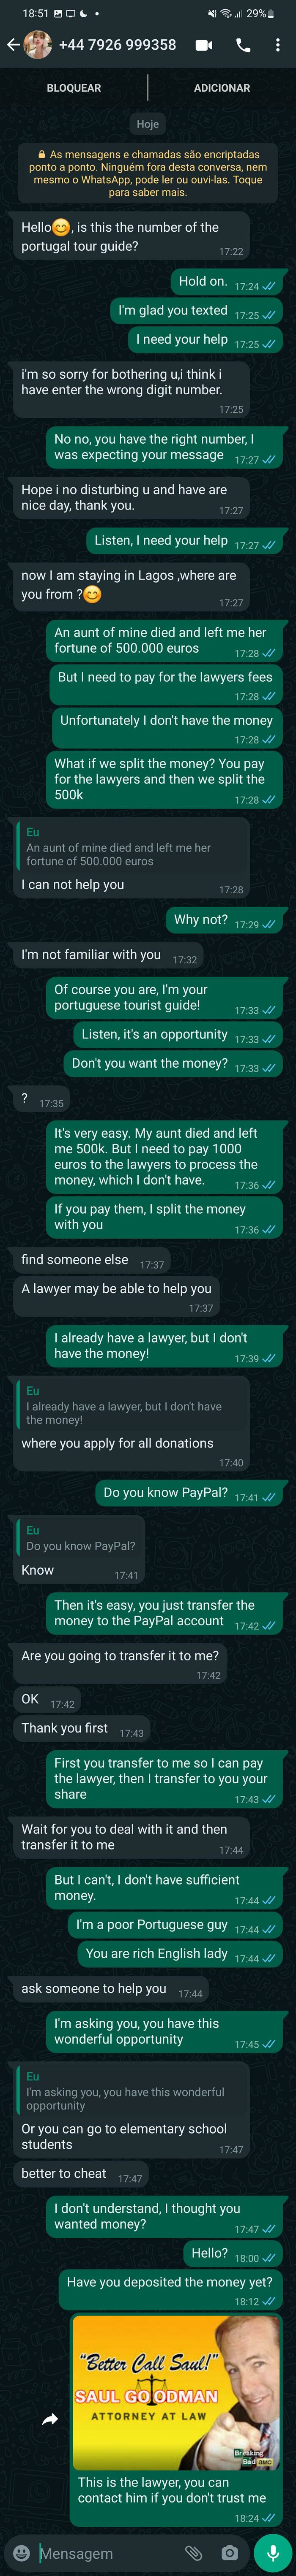 I Tried To Scam The Scammer